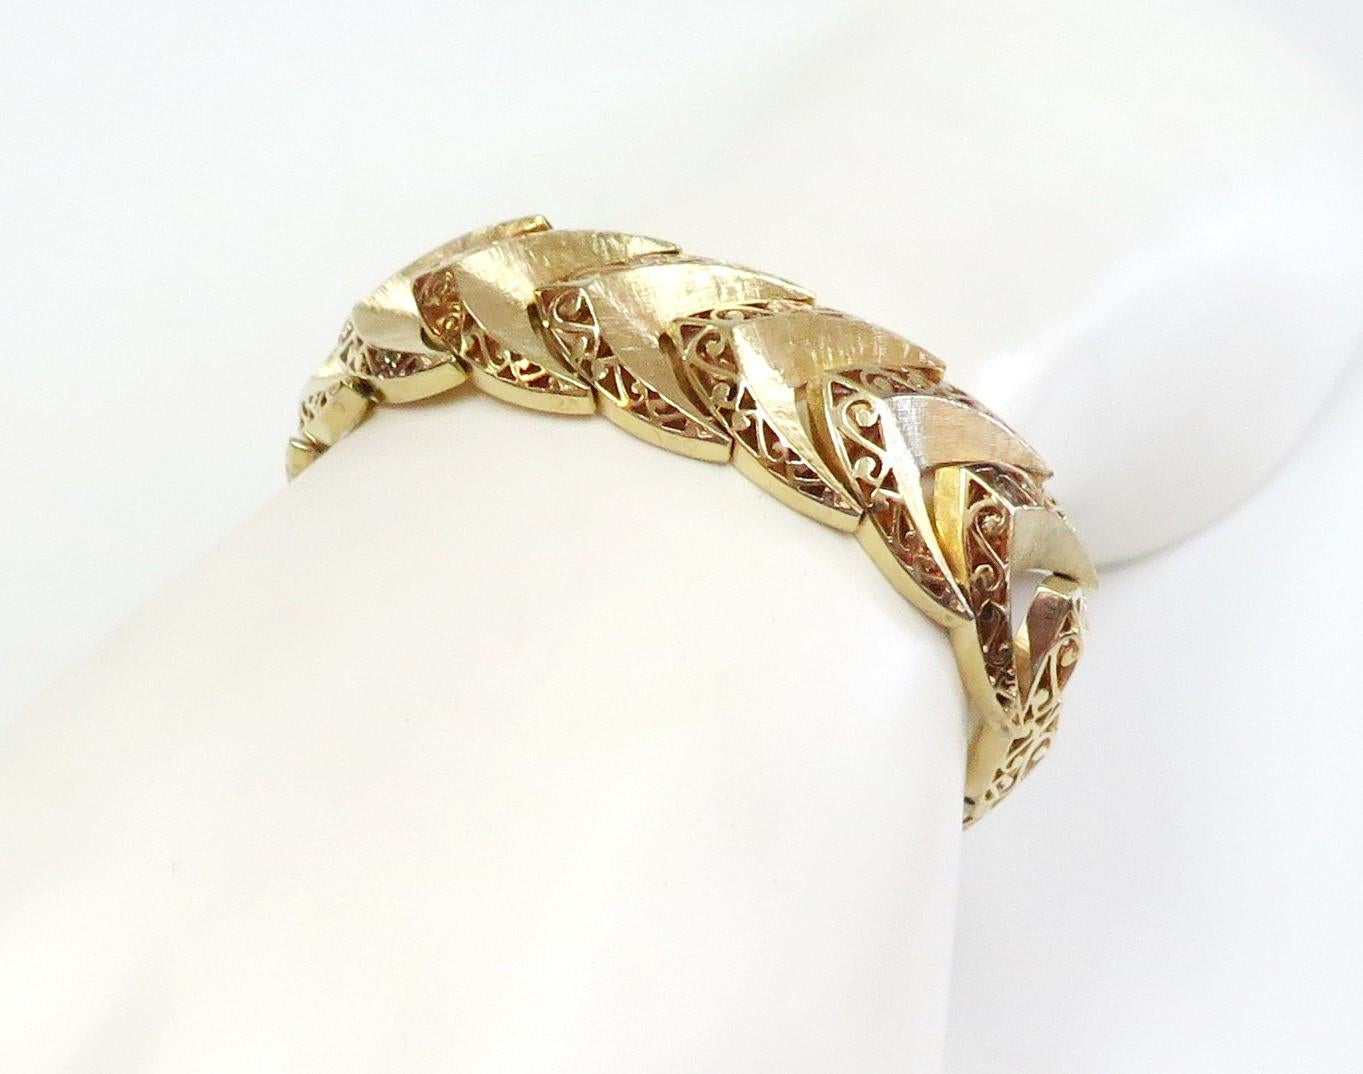 Wide Bracelet with Chevron and Scroll Design, 14 Karat Yellow Gold 6